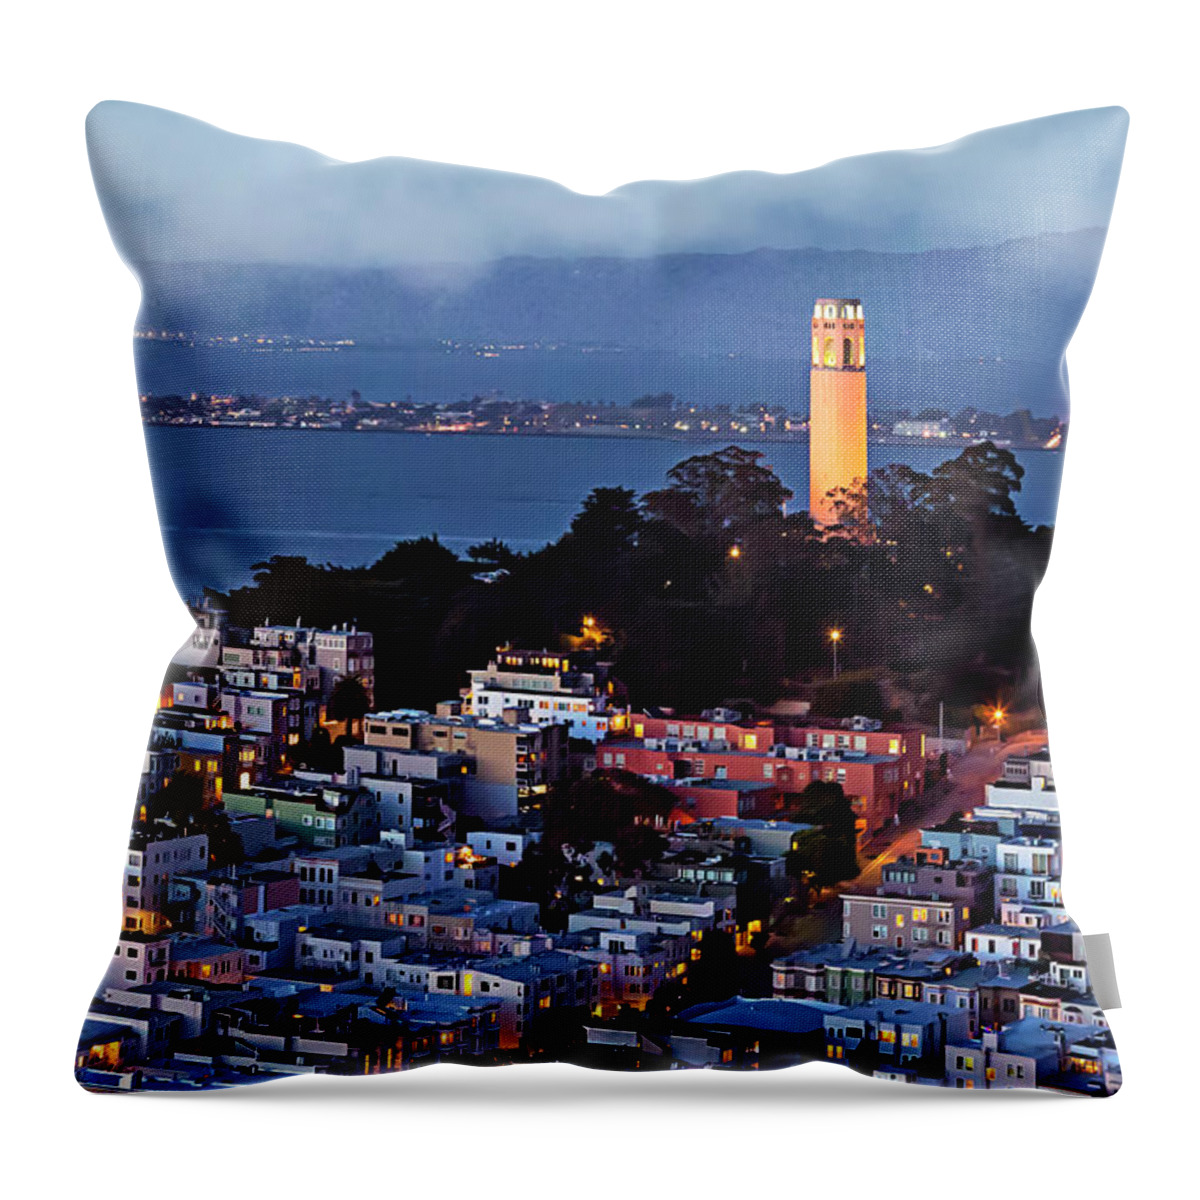 Gary Johnson Throw Pillow featuring the photograph Coit Tower by Gary Johnson